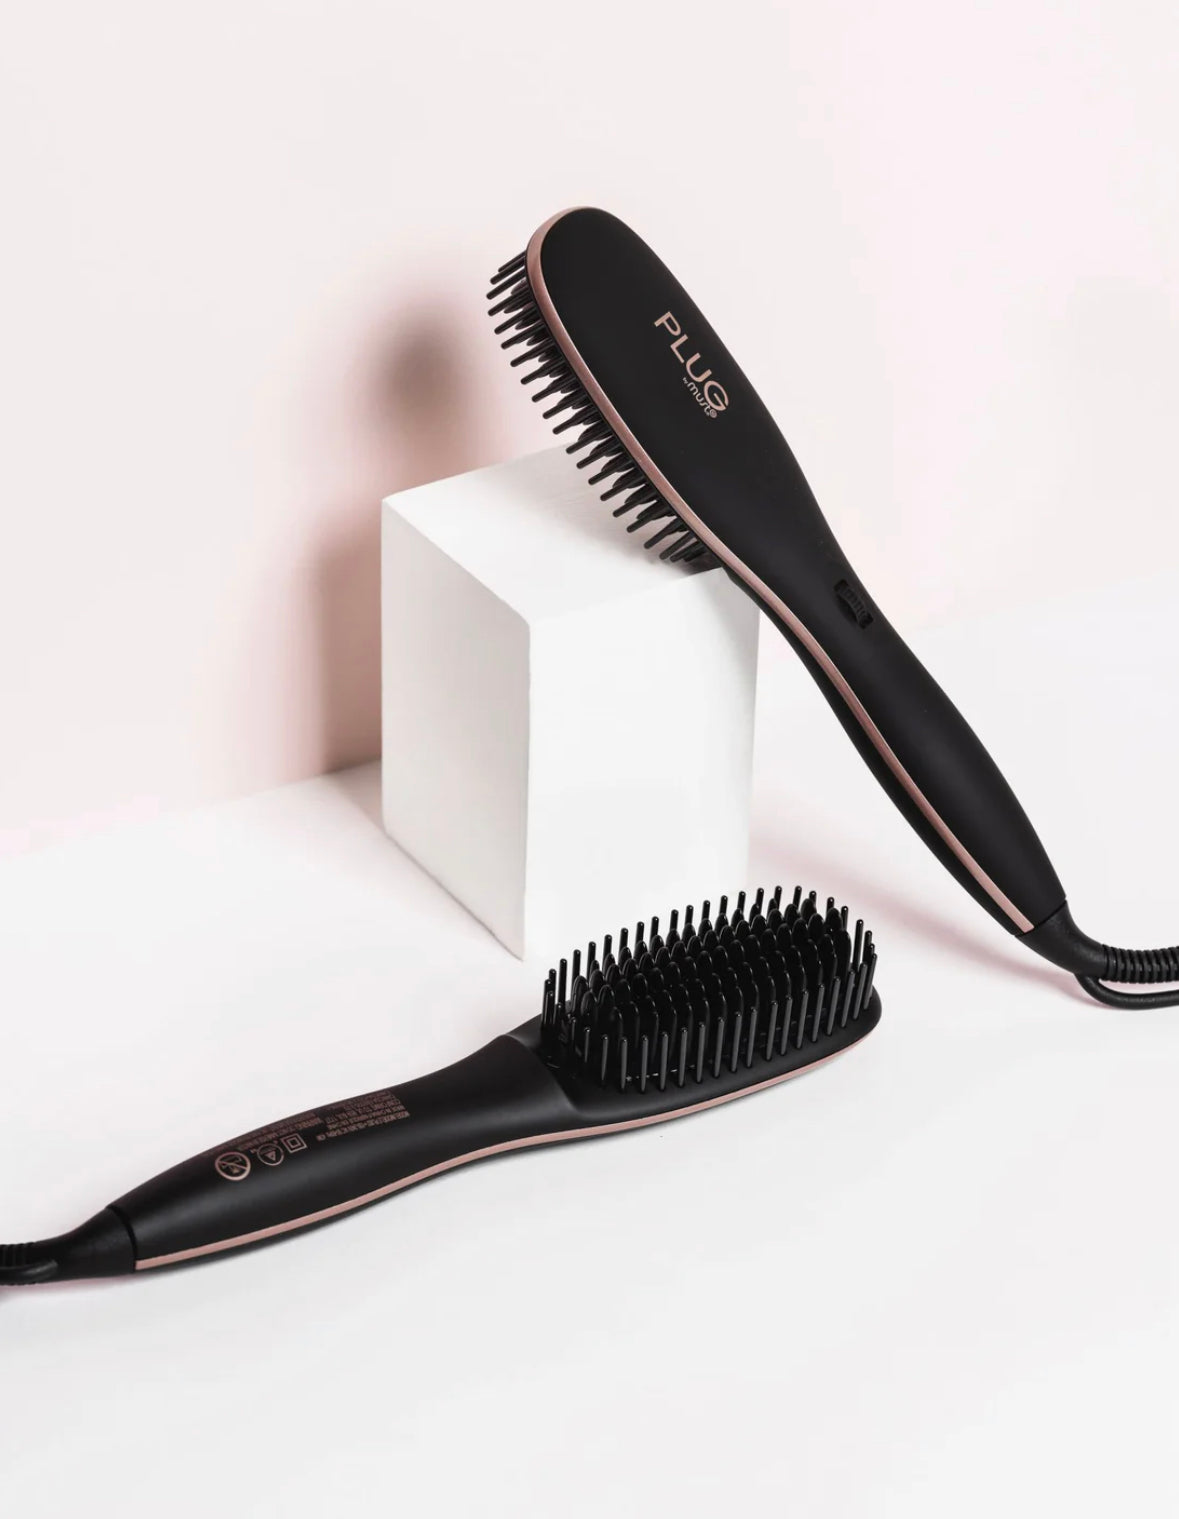 PlugbyMust - Brosse Thermique Lissante "Flow"